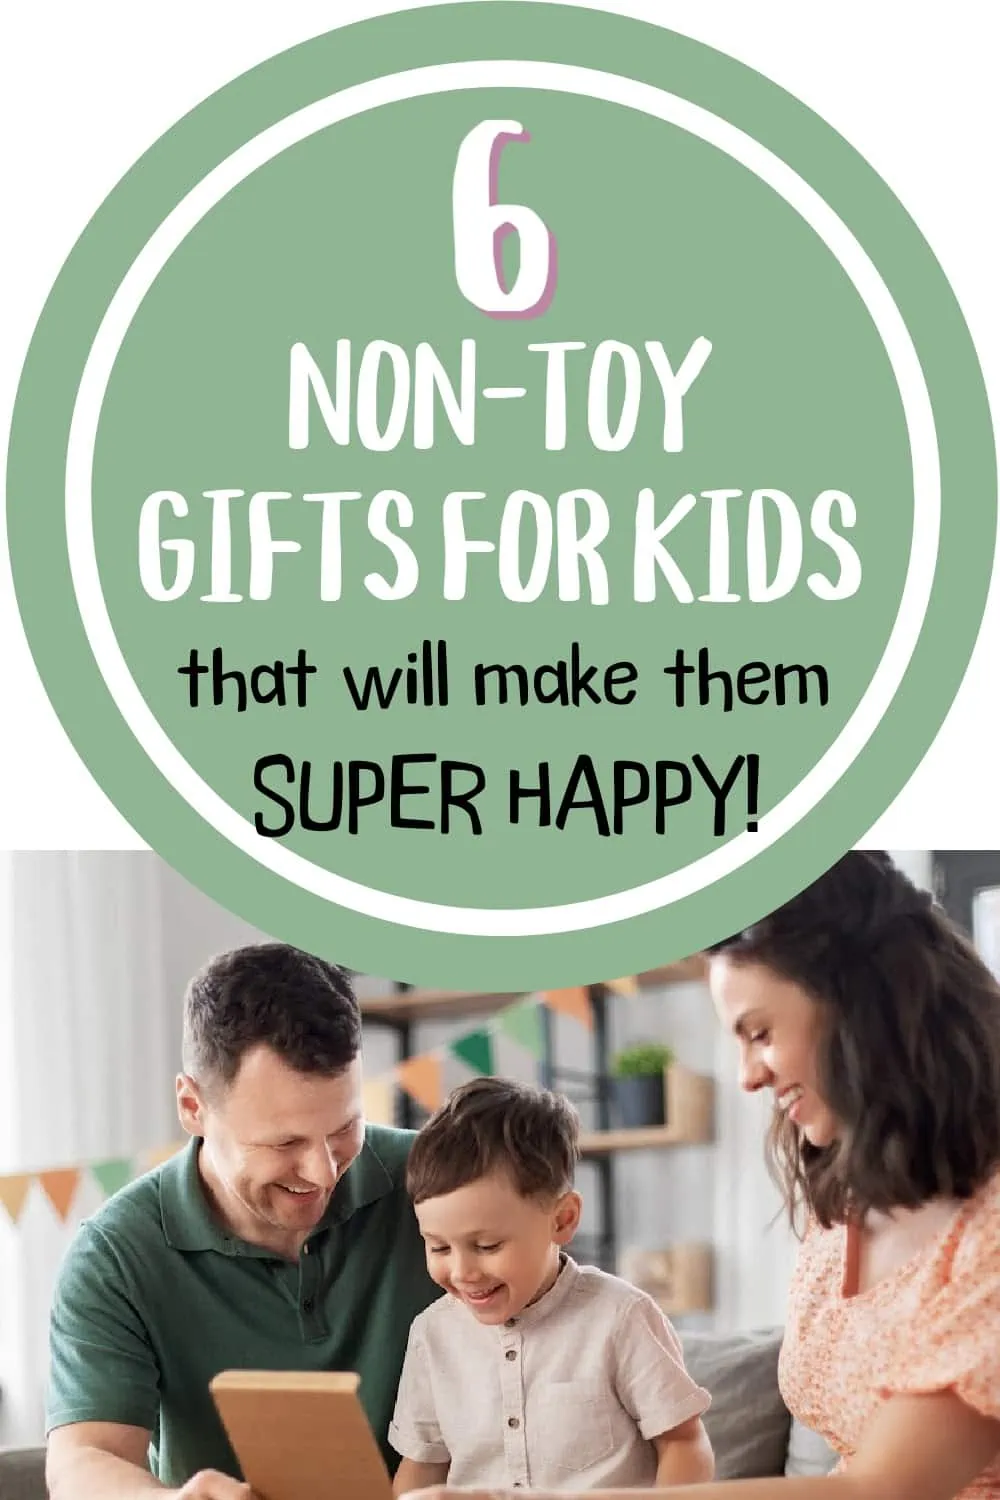 https://thehumbledhomemaker.com/wp-content/uploads/6-non-toy-gifts-for-kids-that-will-make-them-super-happy-and-excited.webp